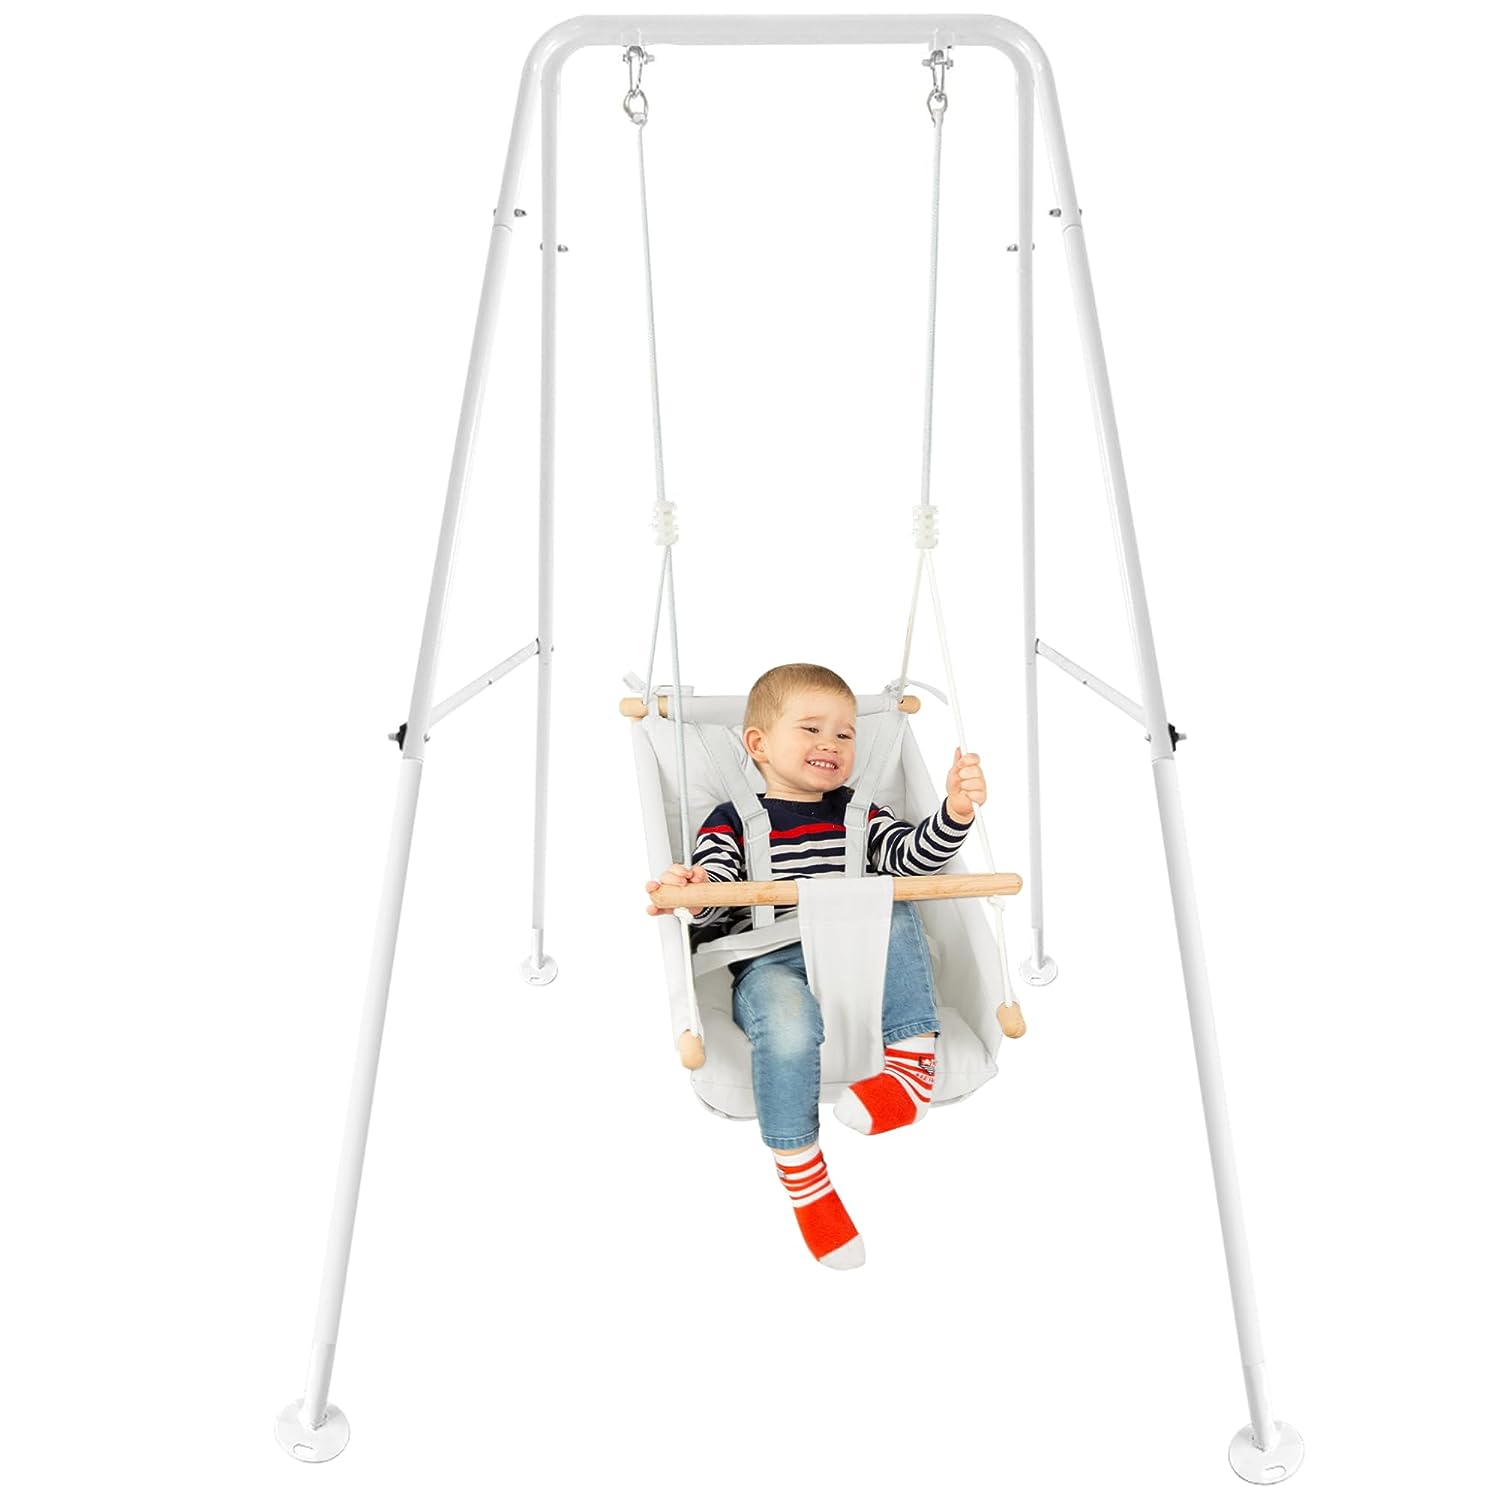 CaTeam - Canvas Baby Swing with Stand, Wooden Hanging Swing Seat